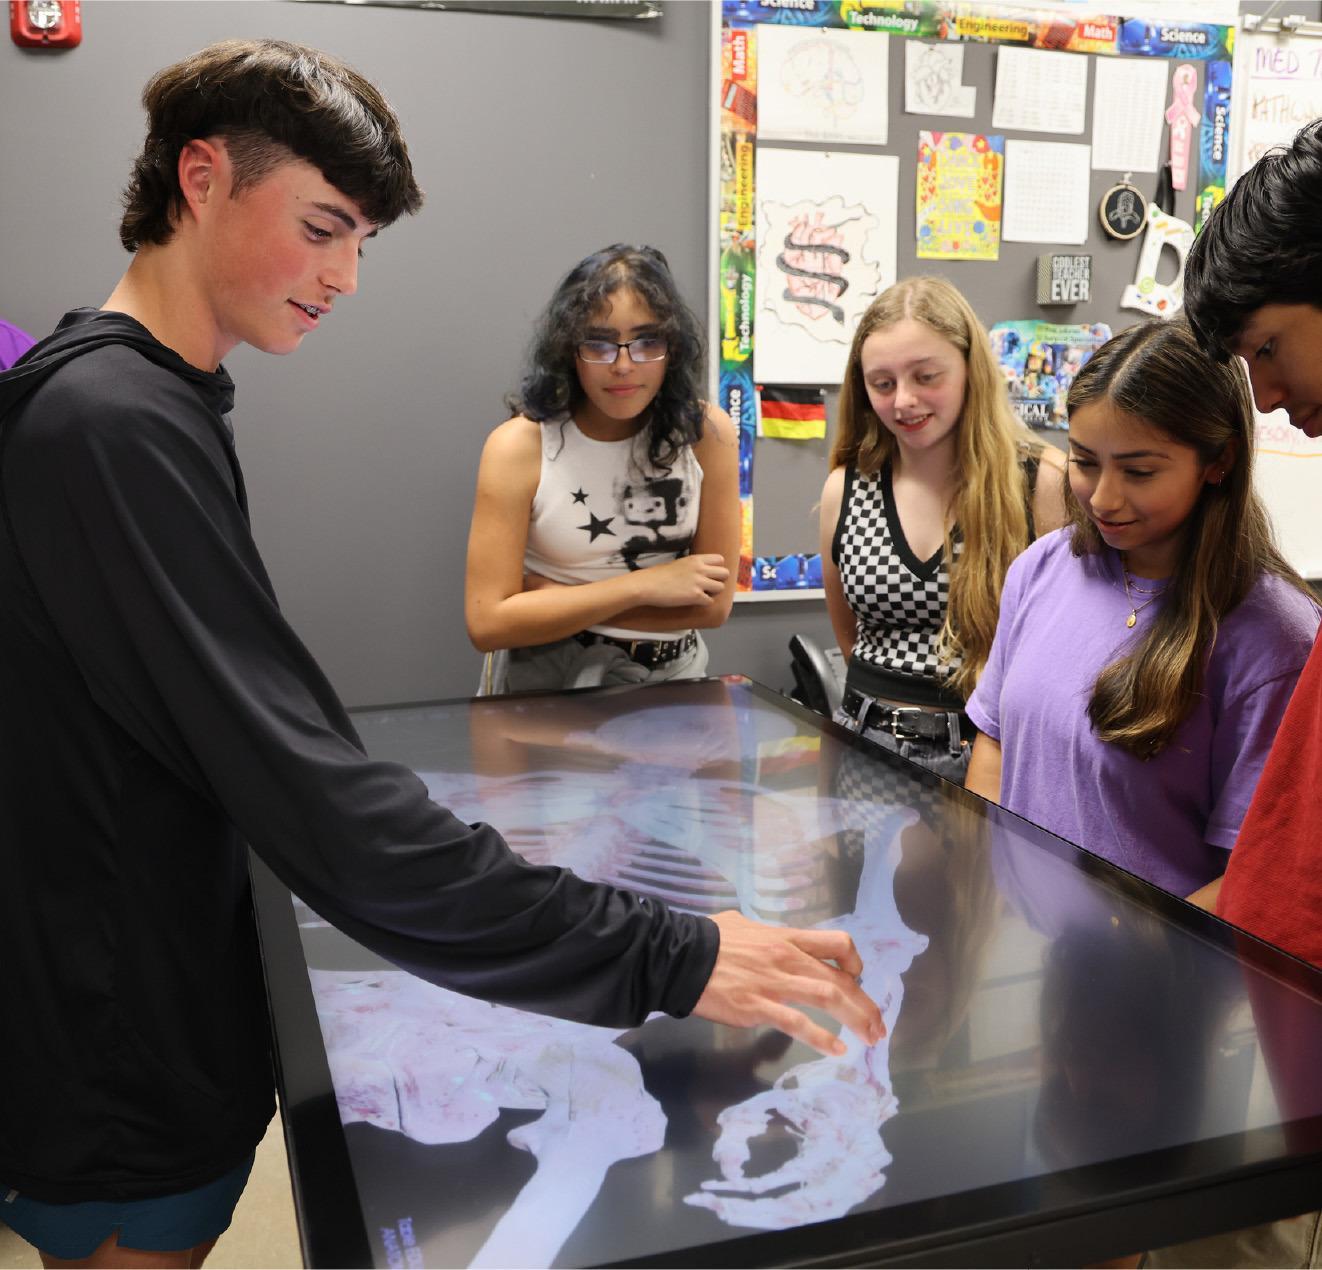 SMCISD uses anatomy 'table' in science classes